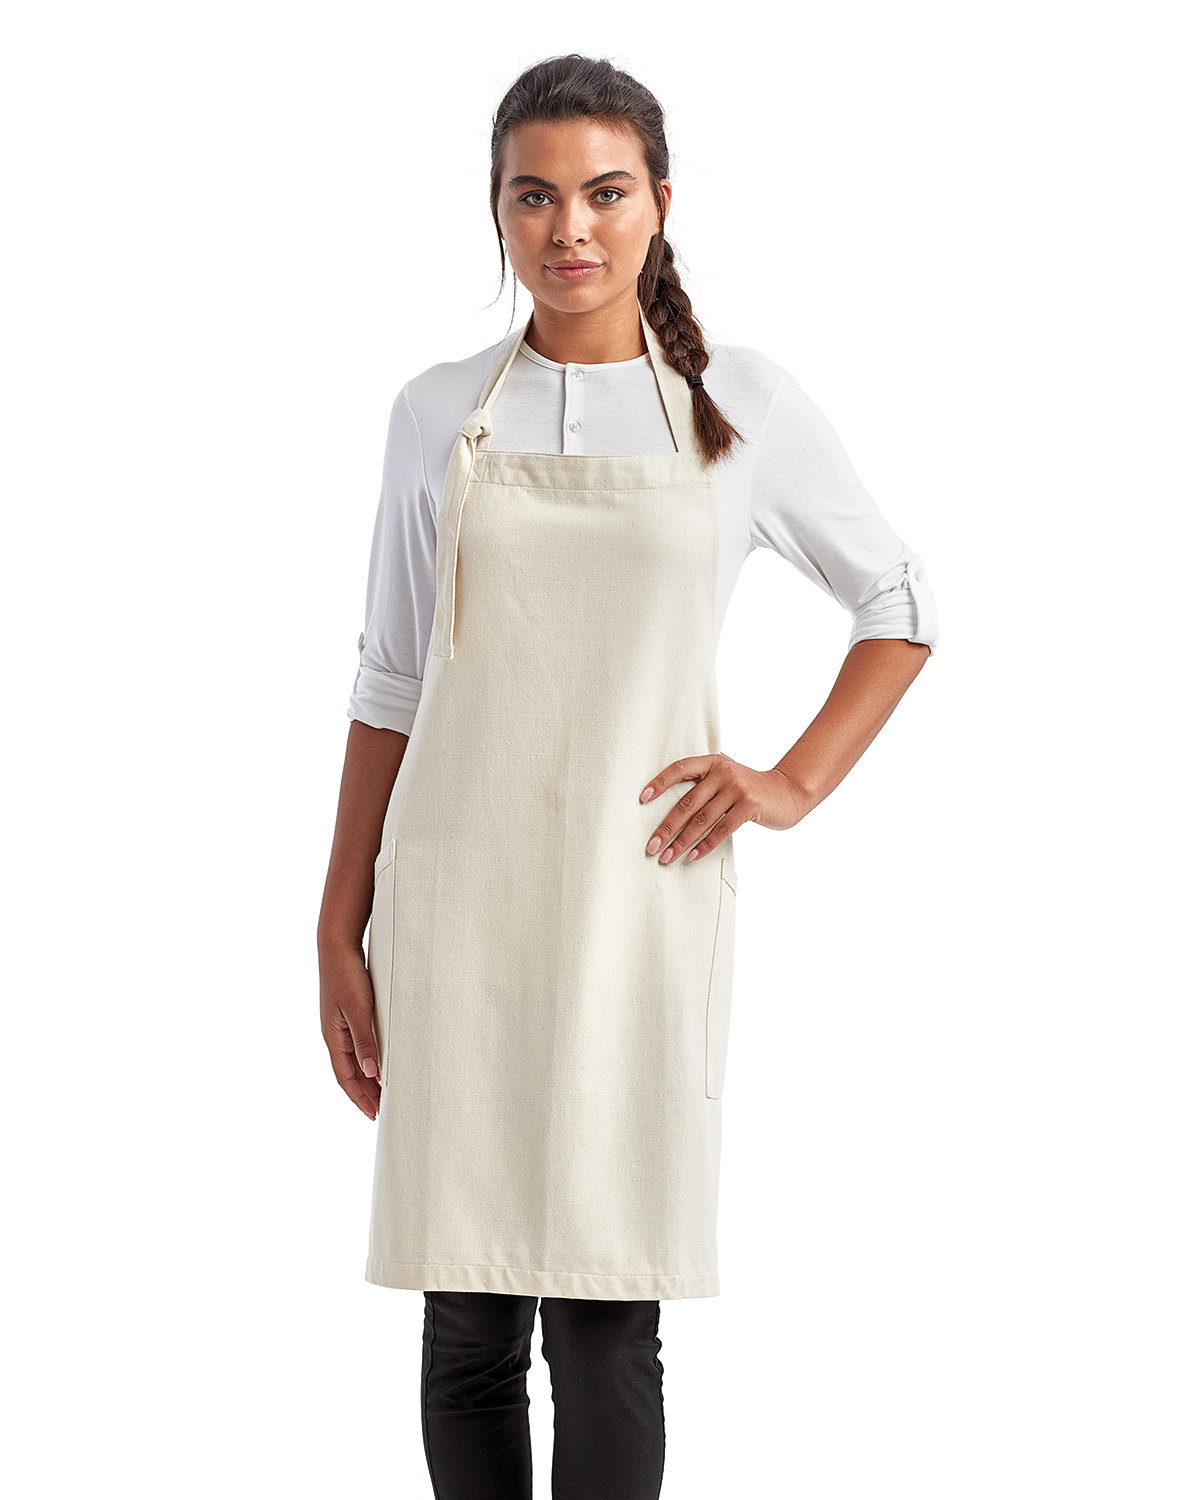 Unisex ‘regenerate’ Recycled Bib Apron-Artisan Collection by Reprime